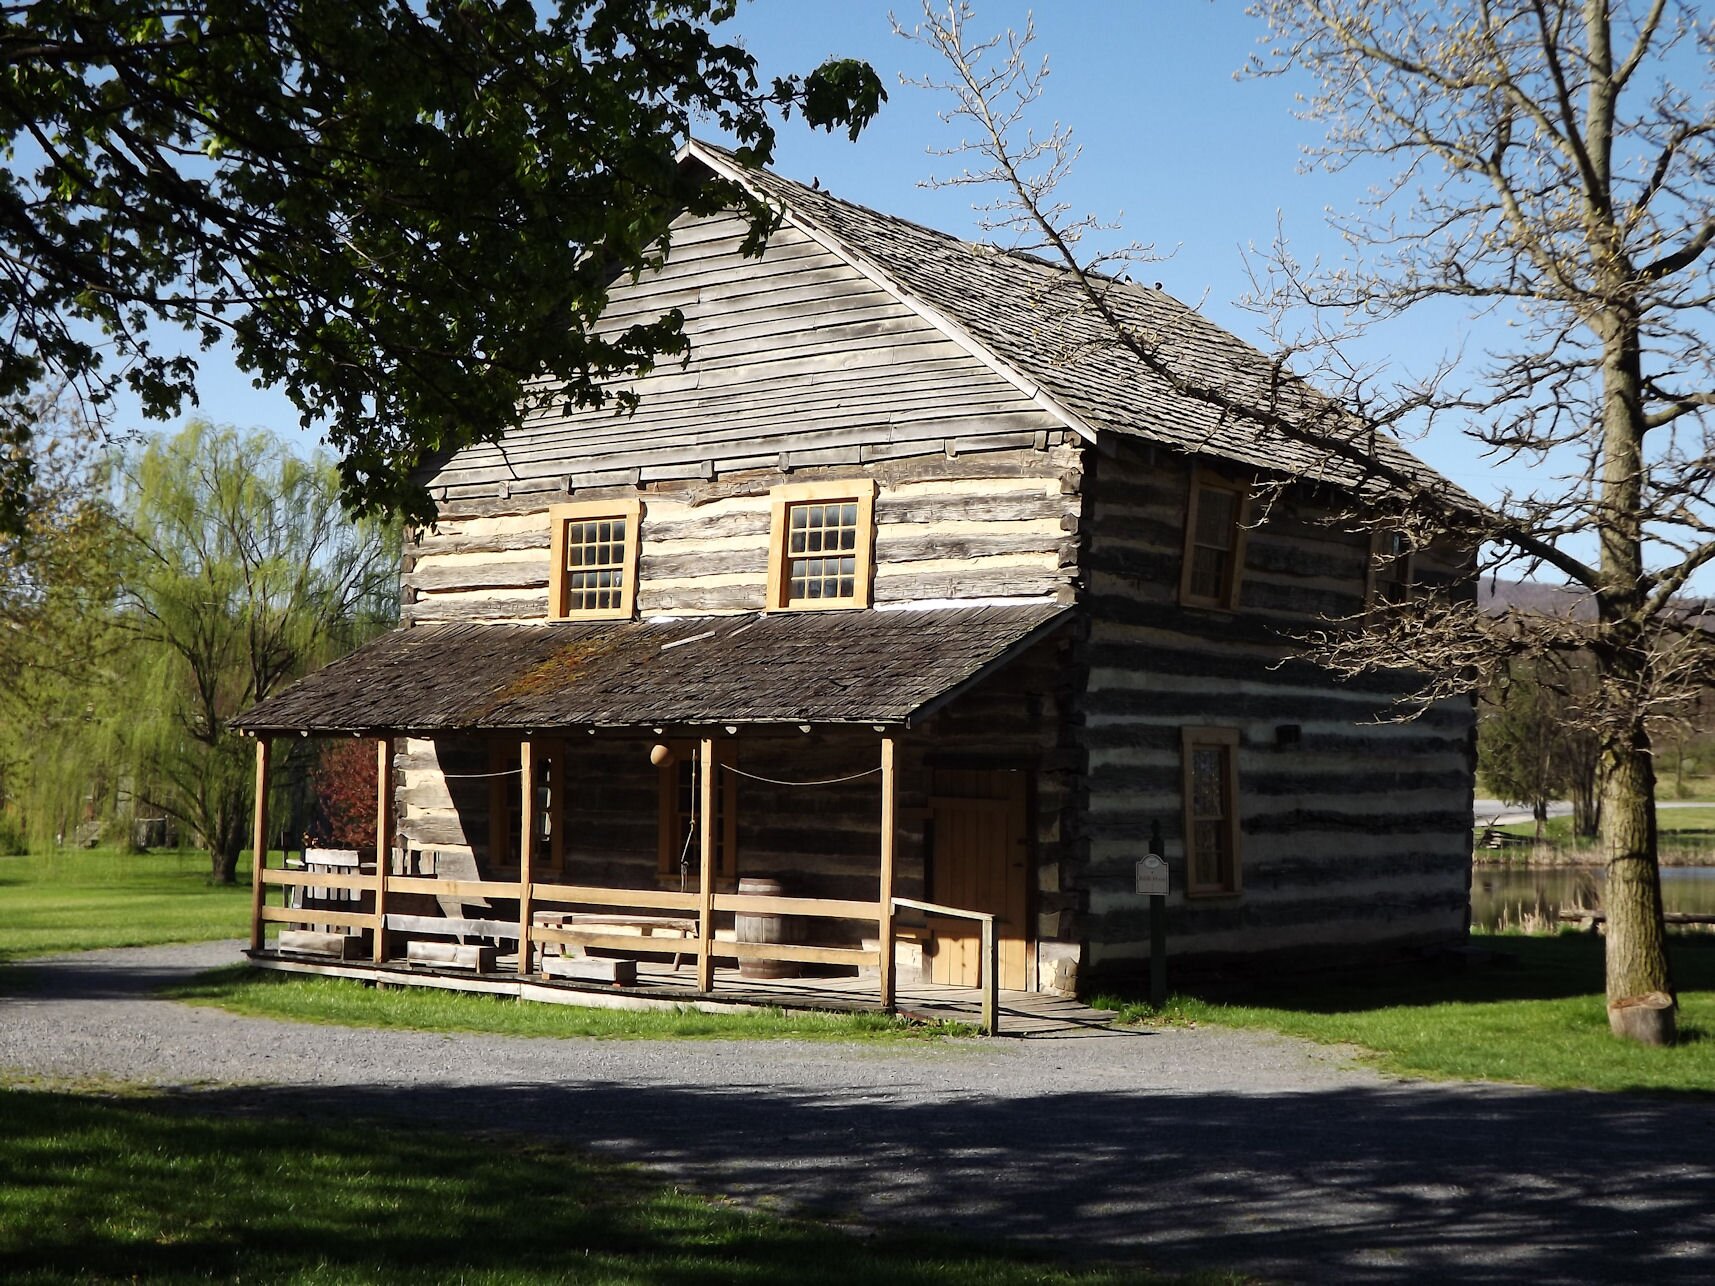 Living history museum in Bedford, PA representing mid-1700s - circa 1900.  Open Mem. Day-Labor Day.  Closed Weds.  Visit http://t.co/GZOnhIljjH for more info.